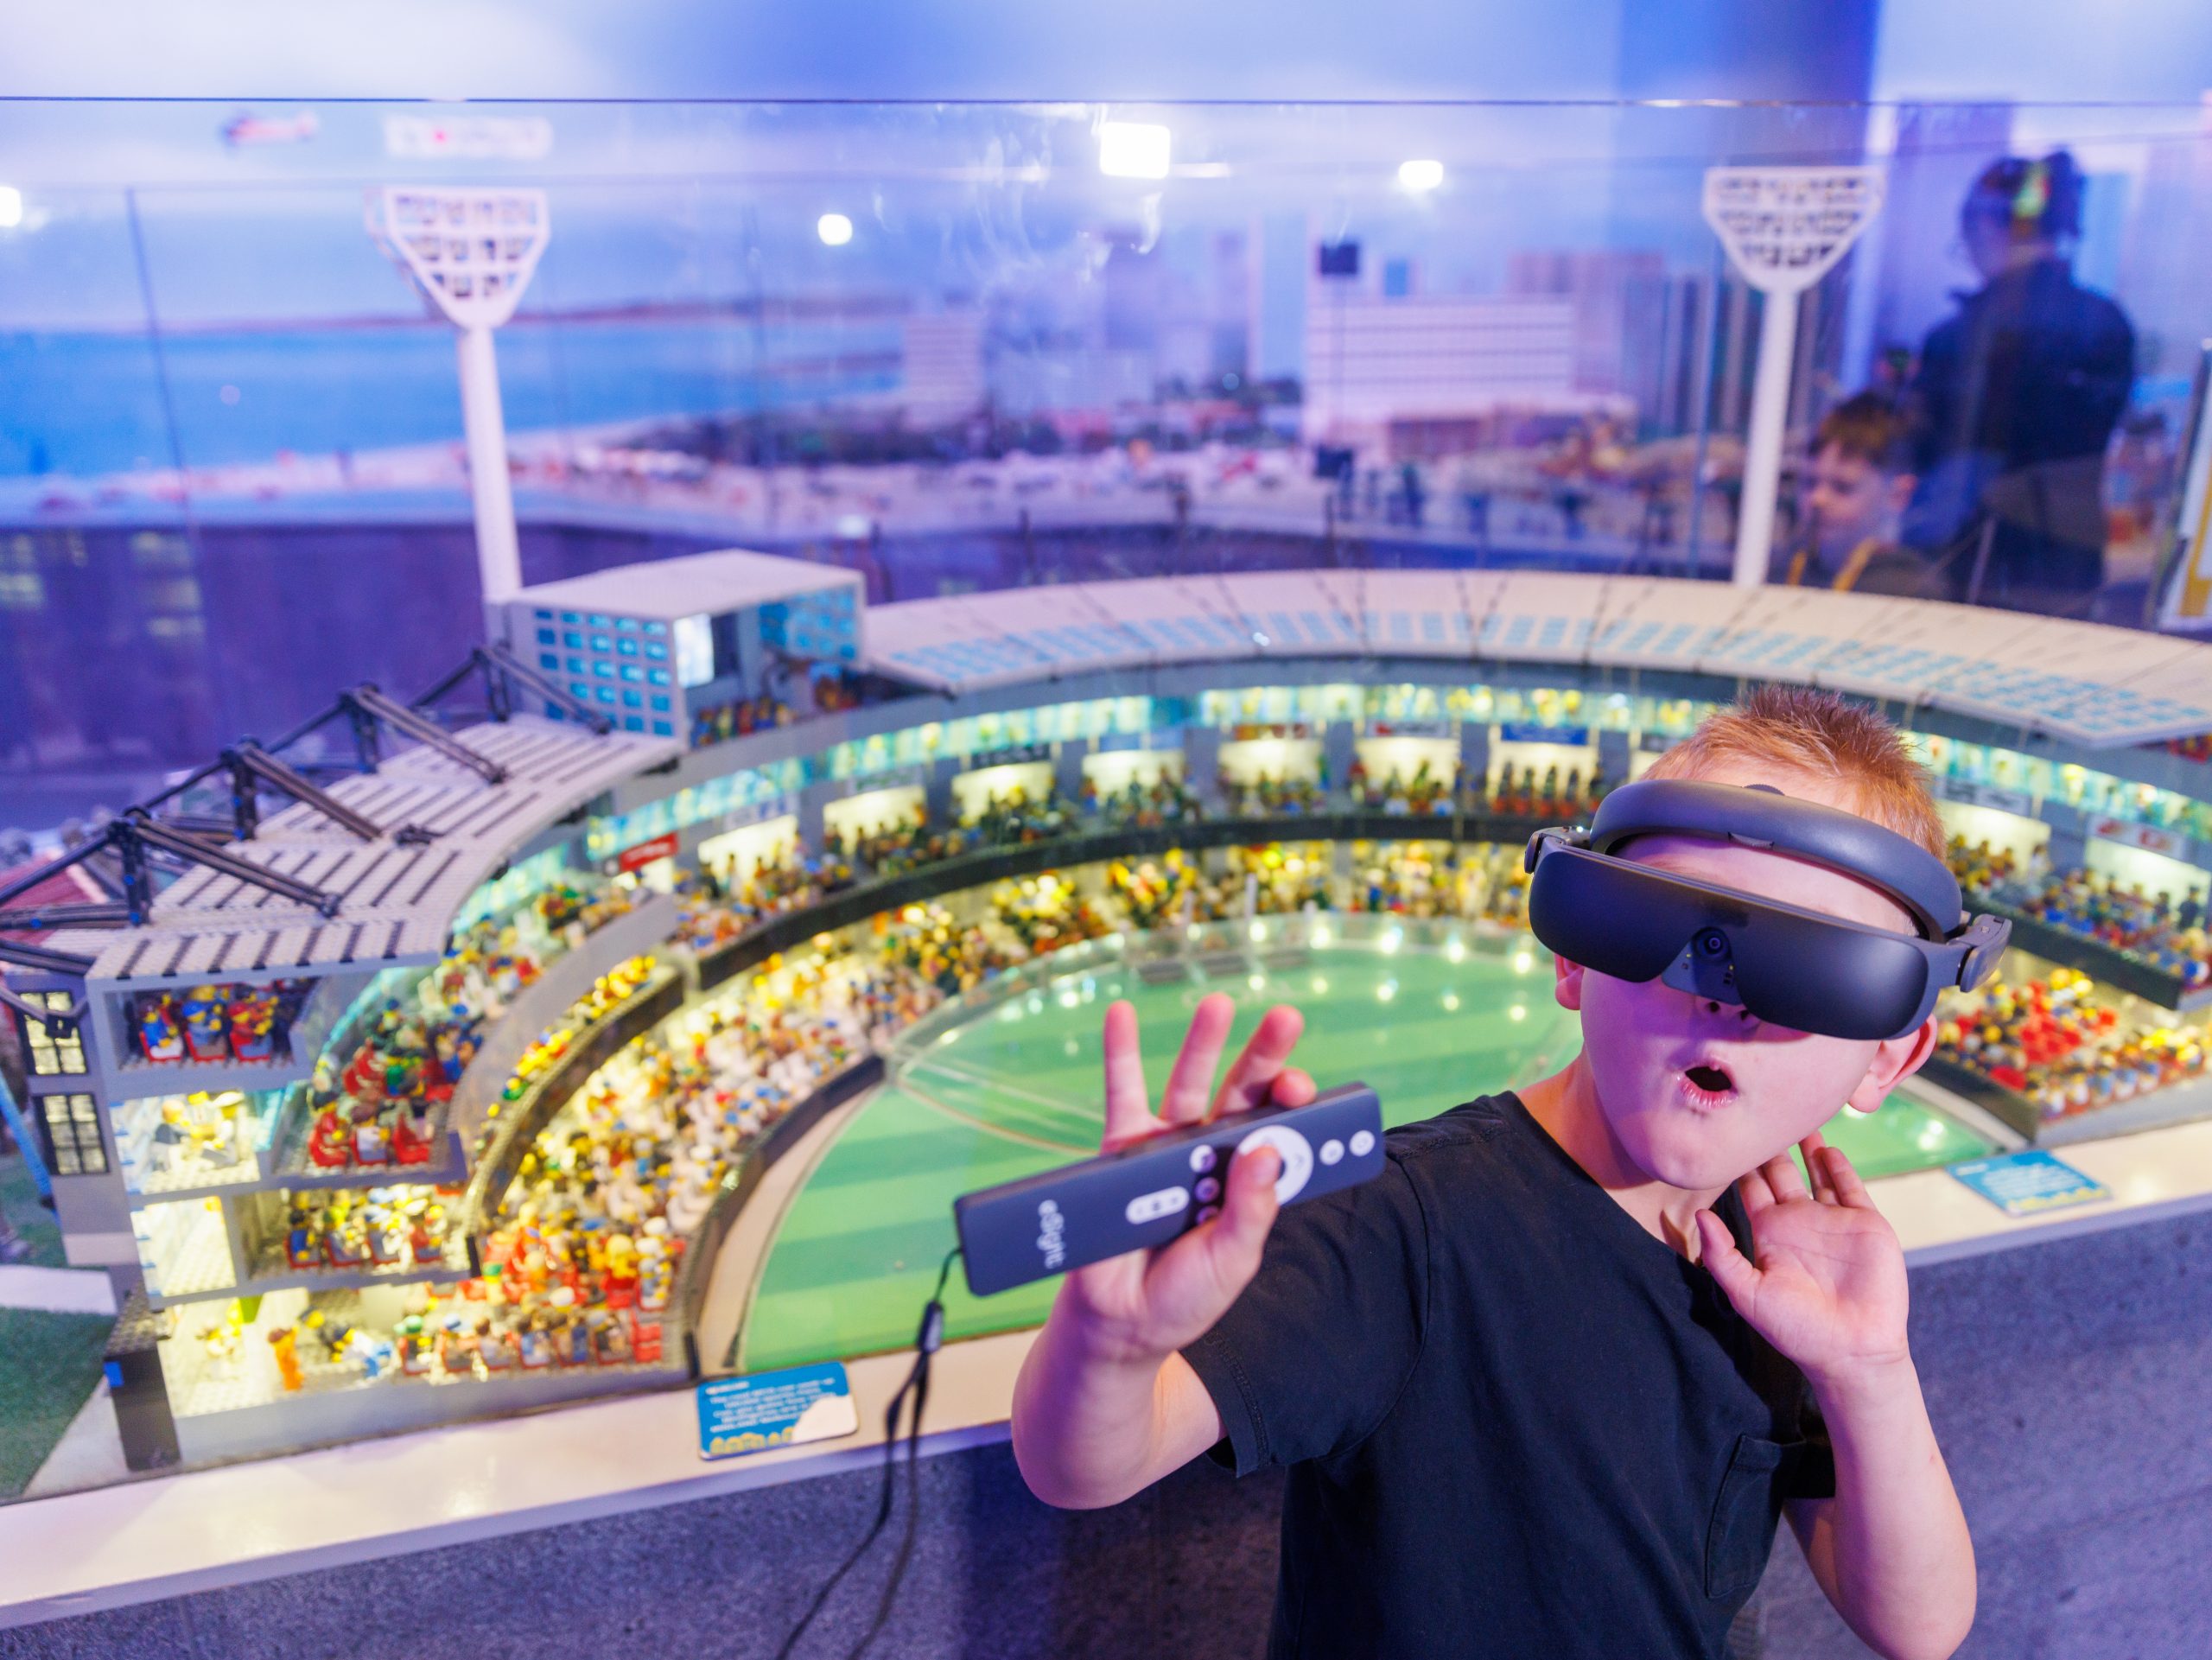 Ethan wearing an eSight 4 device. Stadium replica made from lego in foreground.